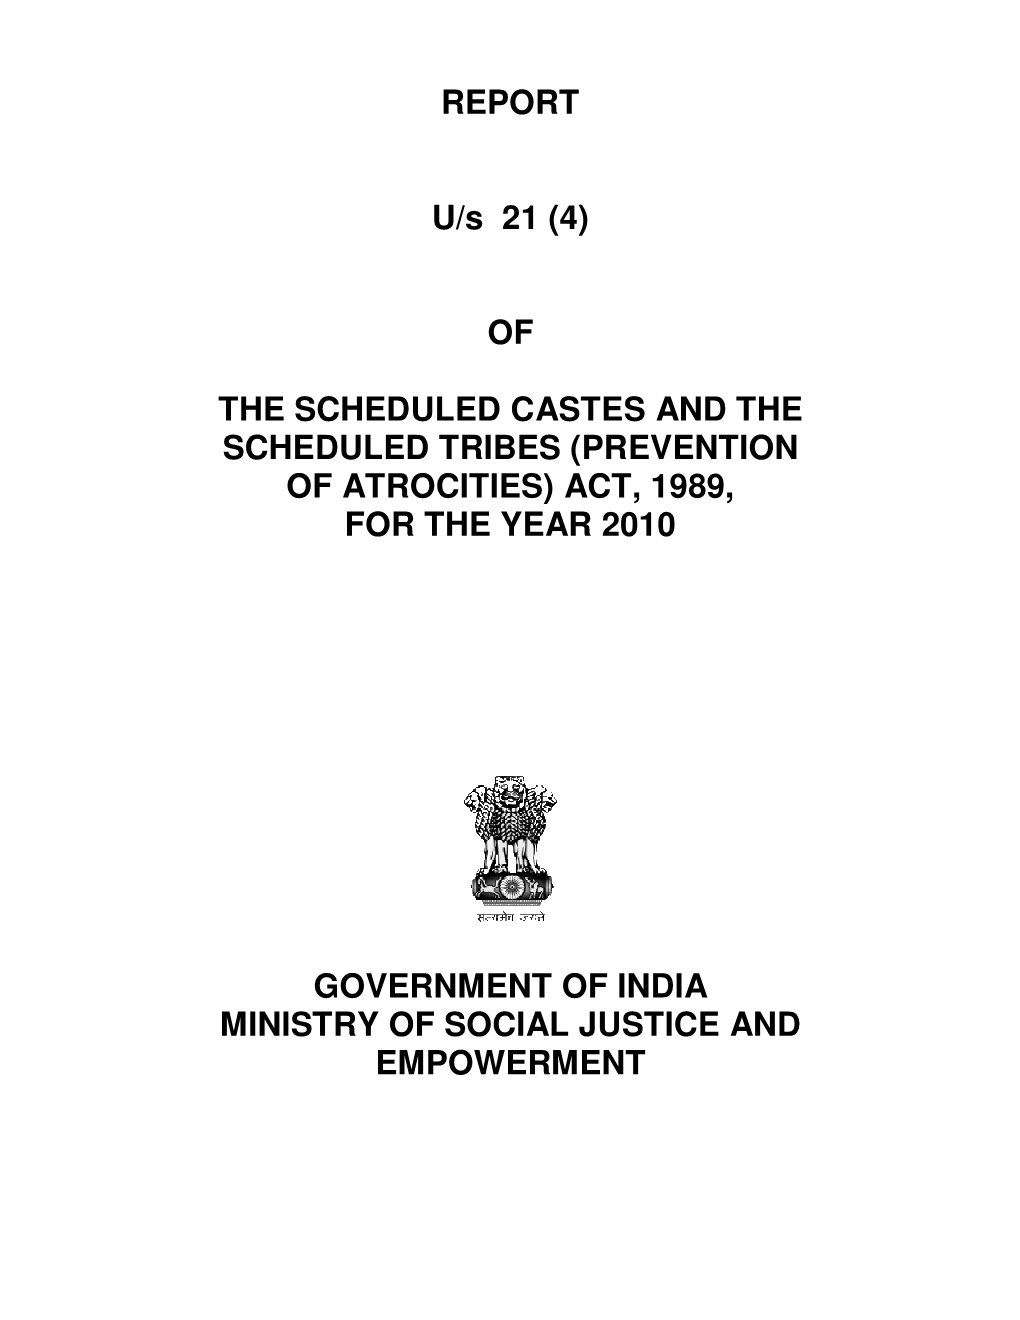 (Prevention of Atrocities) Act, 1989, for the Year 2010